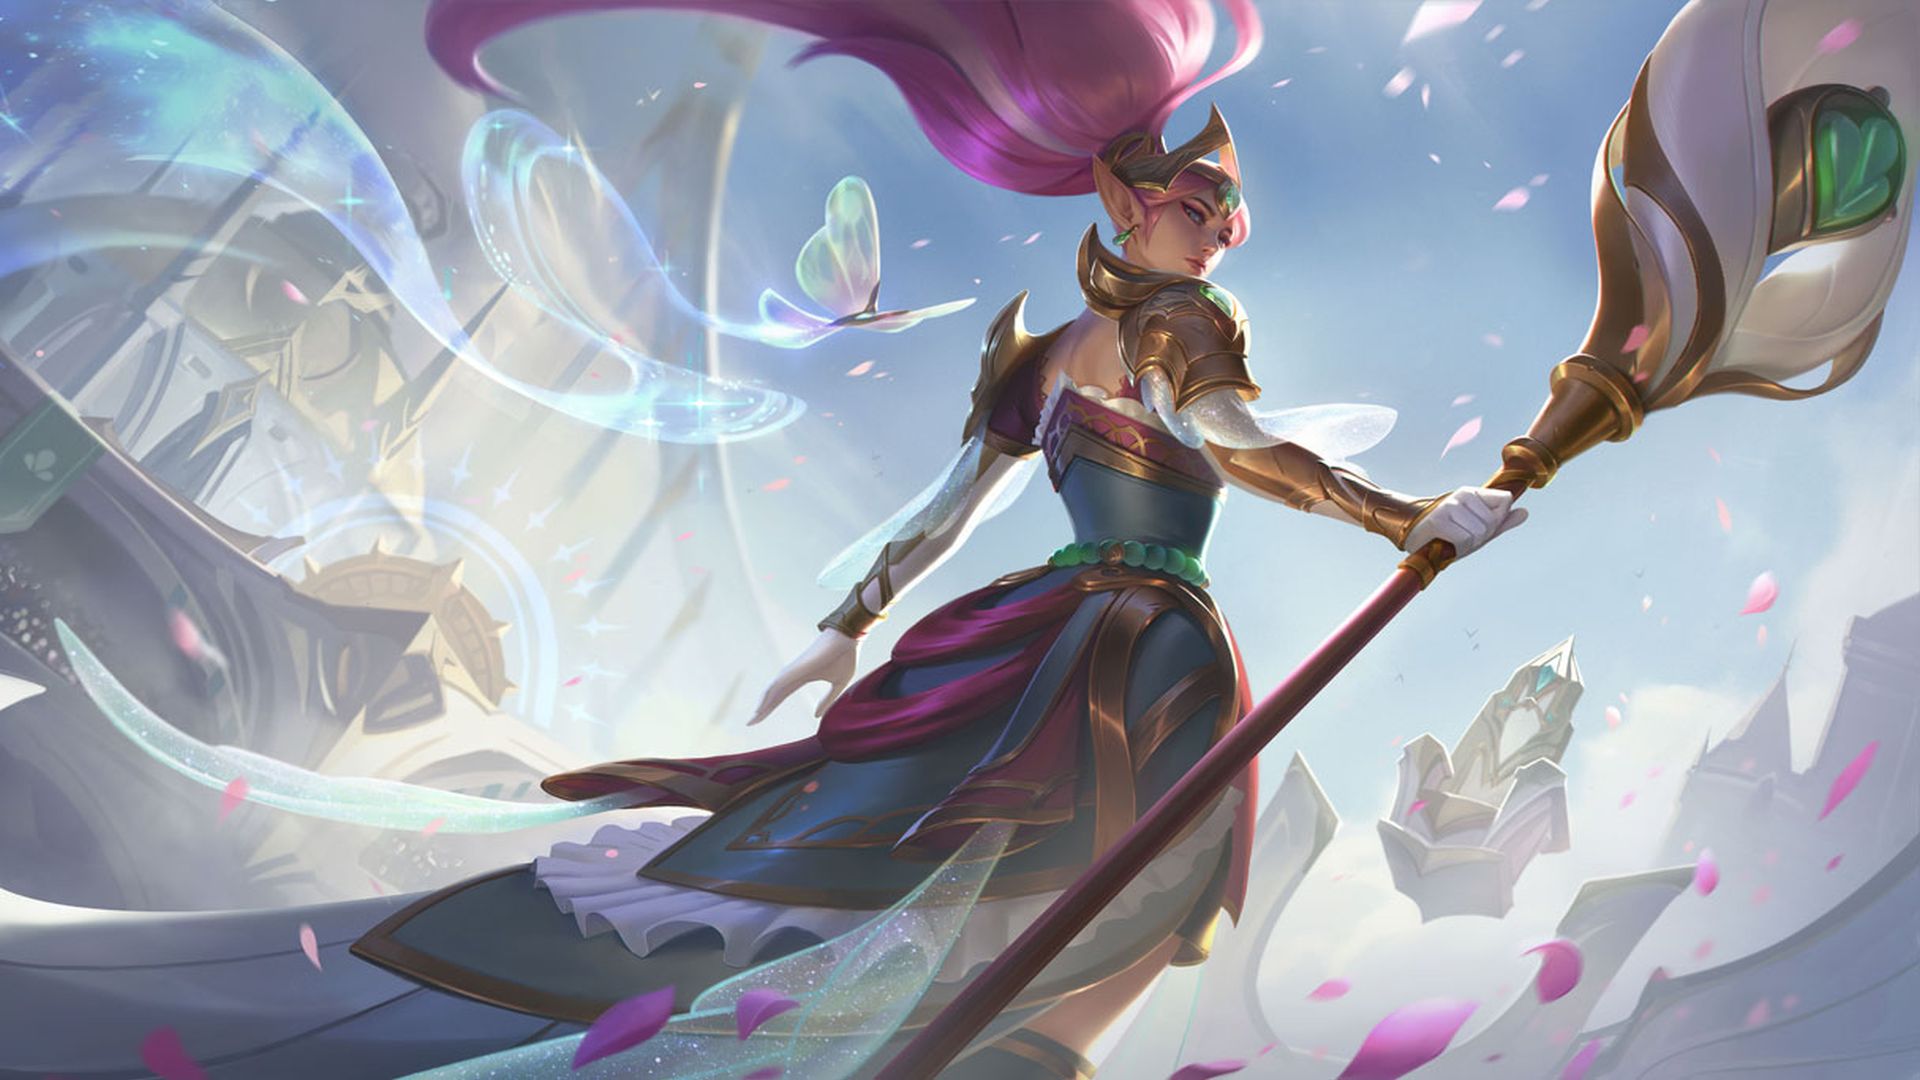 Here’s the League of Legends 2021 patch schedule – every season 11 update release date